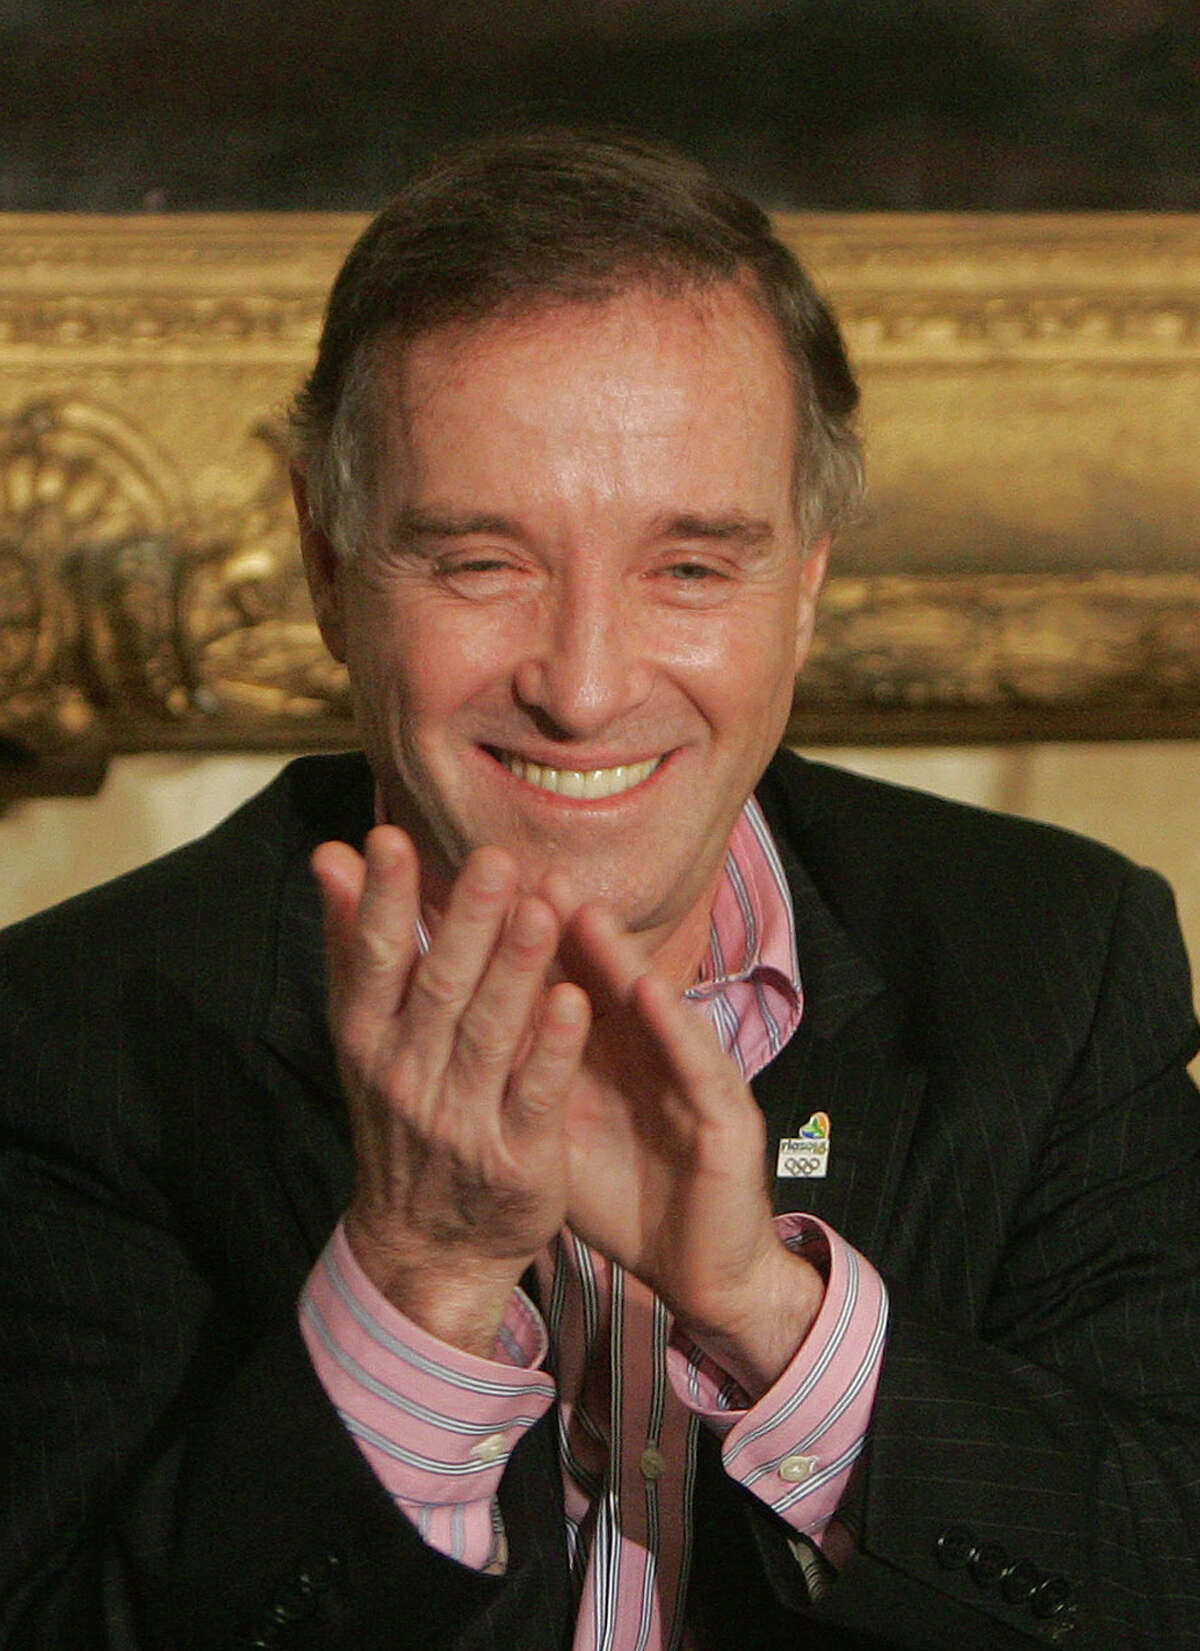 In this April 7, 2009 file photo, Brazilian billionaire Eike Batista attends a ceremony in which Batista donated about $4.5 U.S. million dollars for the the Rio 2016 Olympic games bid, in Rio de Janeiro, Brazil. Batista has stepped down as chairman of energy company MPX Energia after it was forced to call off a long-sought IPO. (AP Photo/Ricardo Moraes, File)